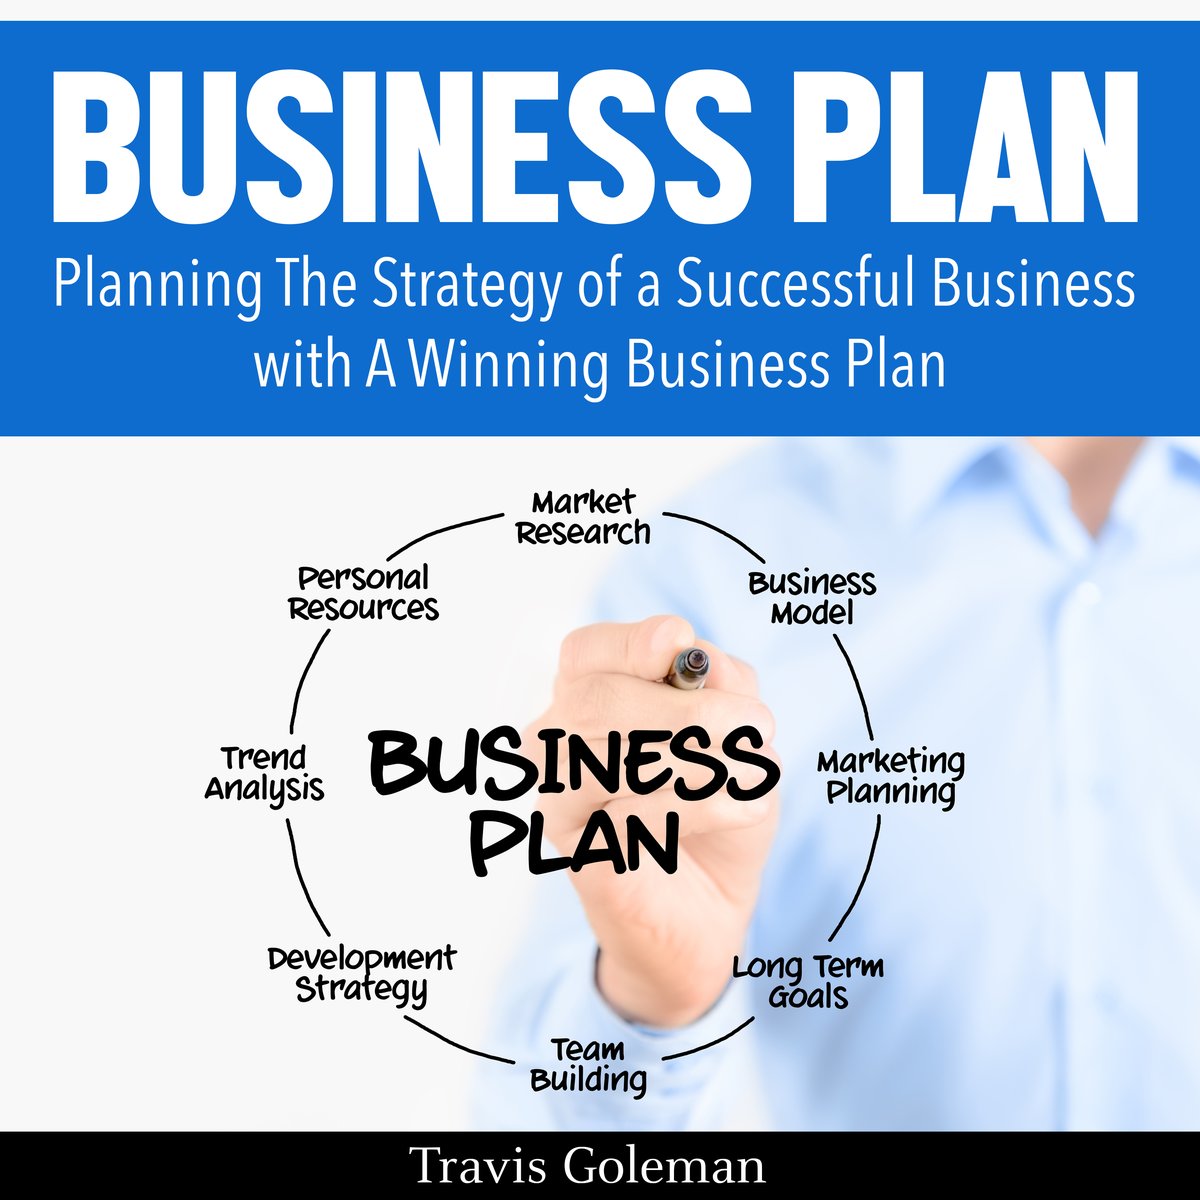 explain the features of winning business plan